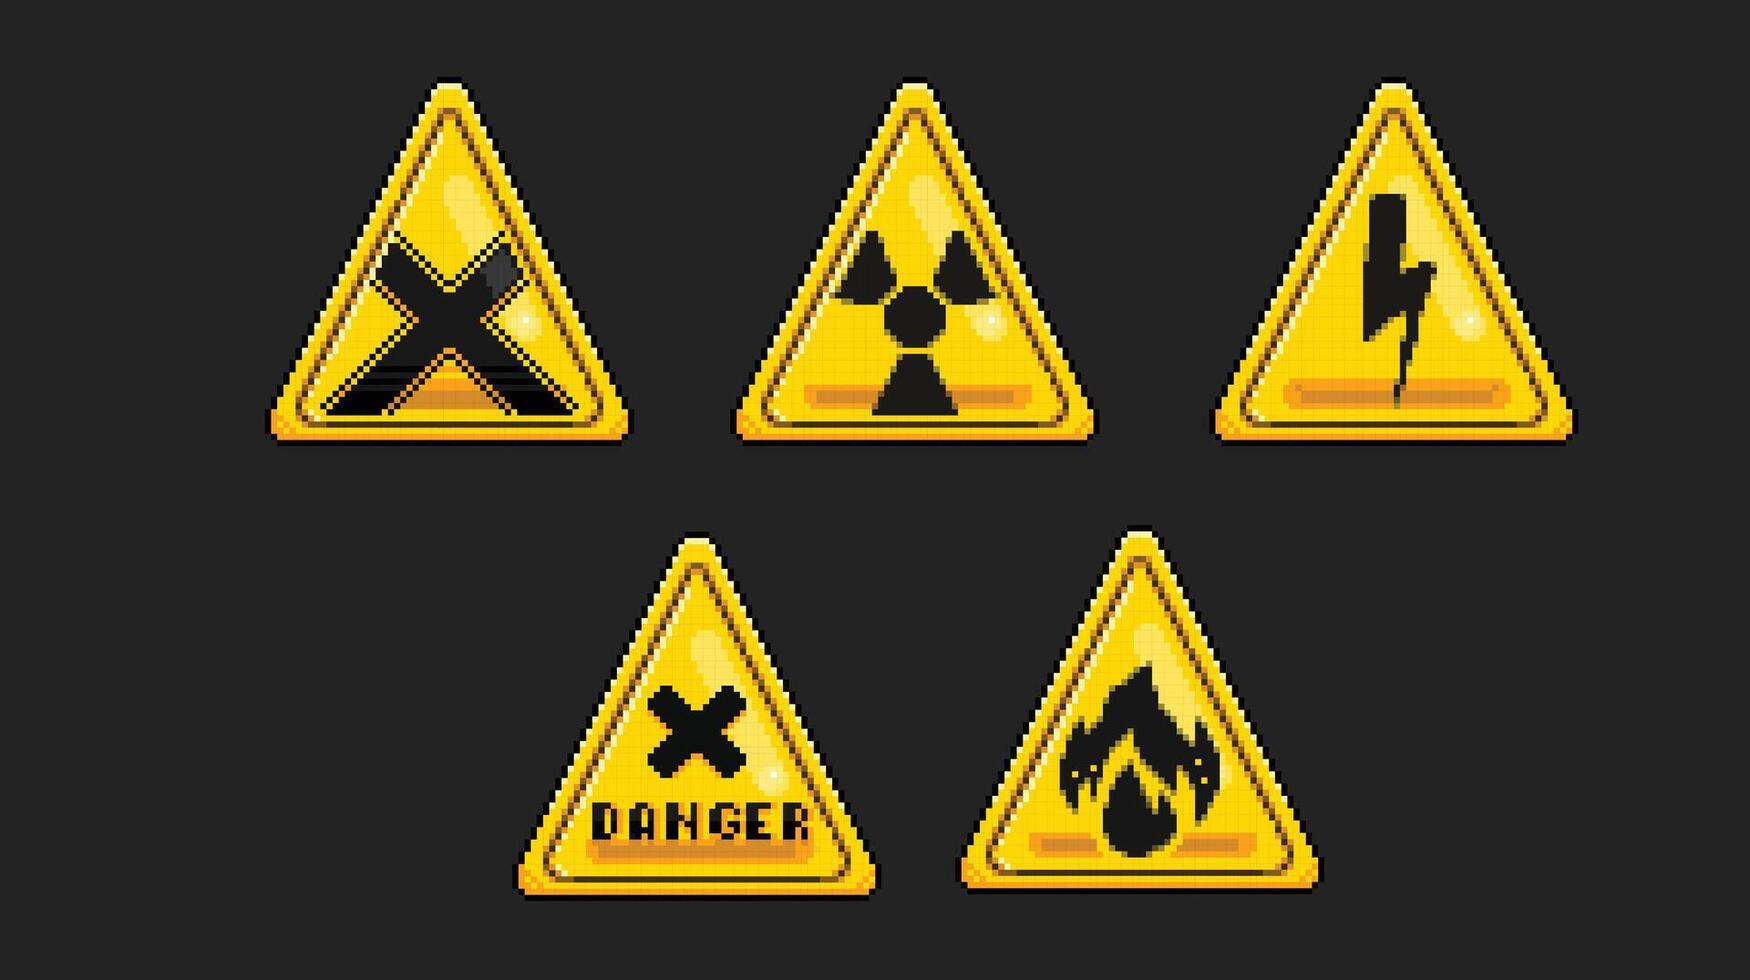 yellow triangle danger sign in pixel art style vector